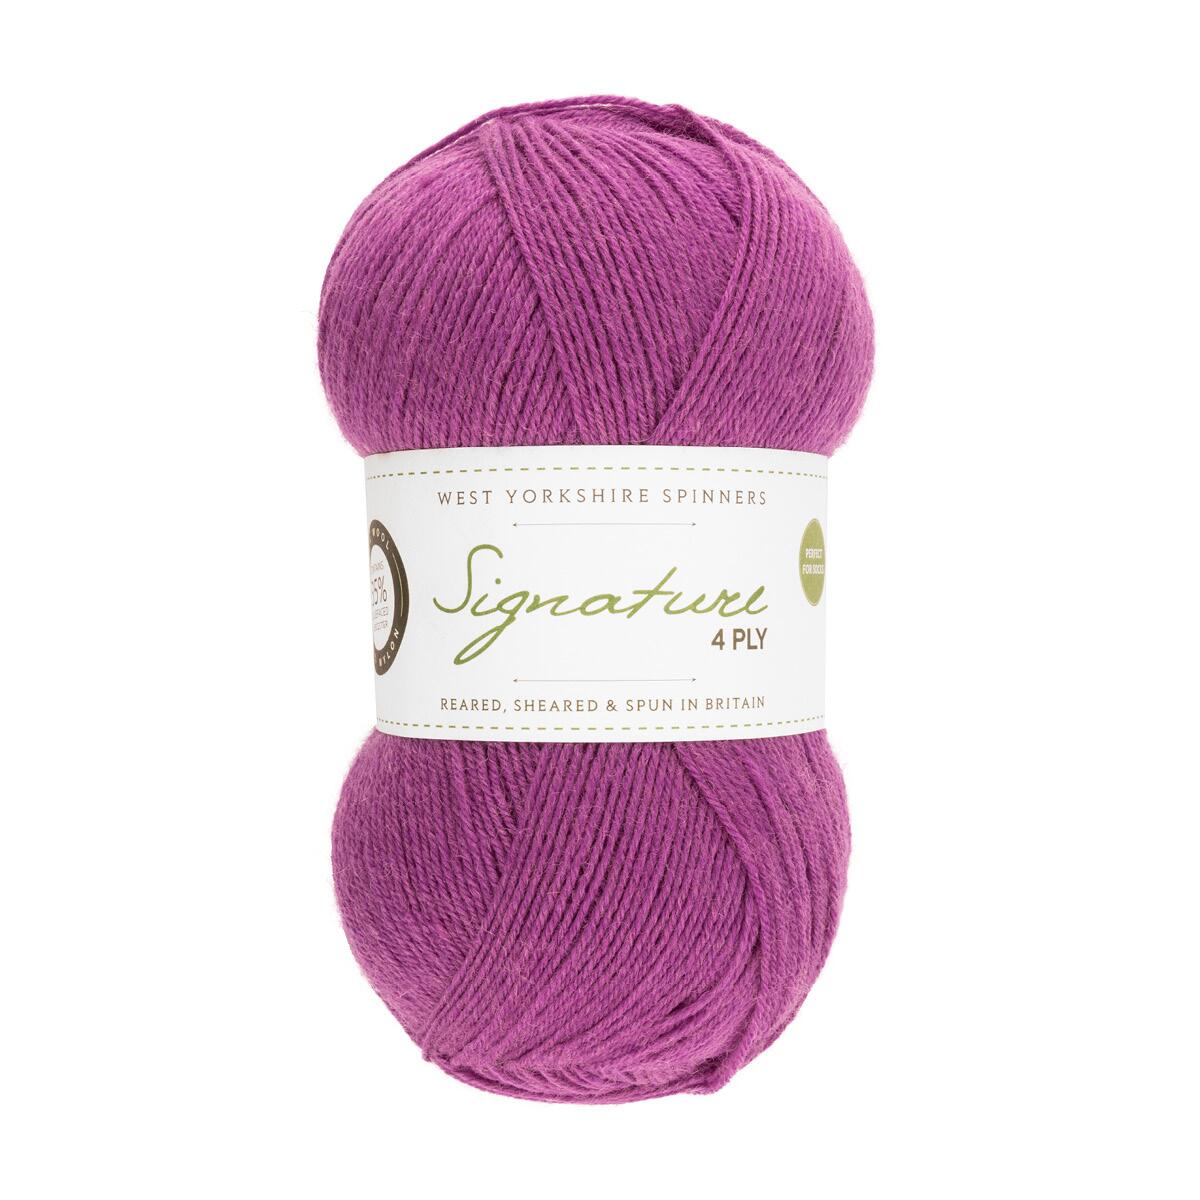 West Yorkshire Spinners Signature 4ply Unis 100g Farbe: 735 Blackcurrant Bomb